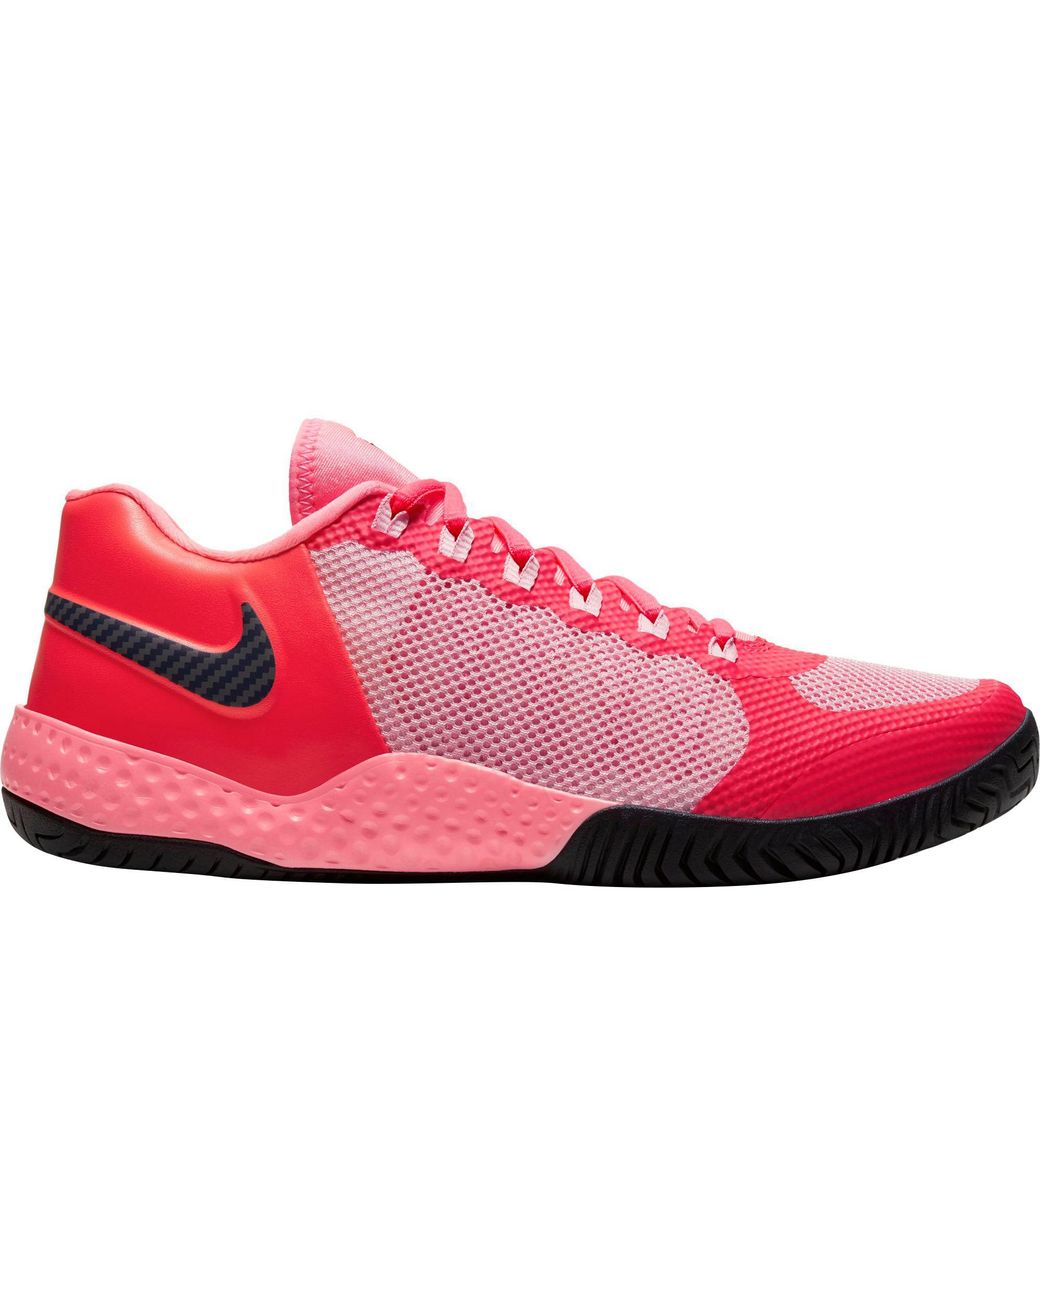 Nike Rubber Court Flare 2 Qs Tennis Shoes - Lyst